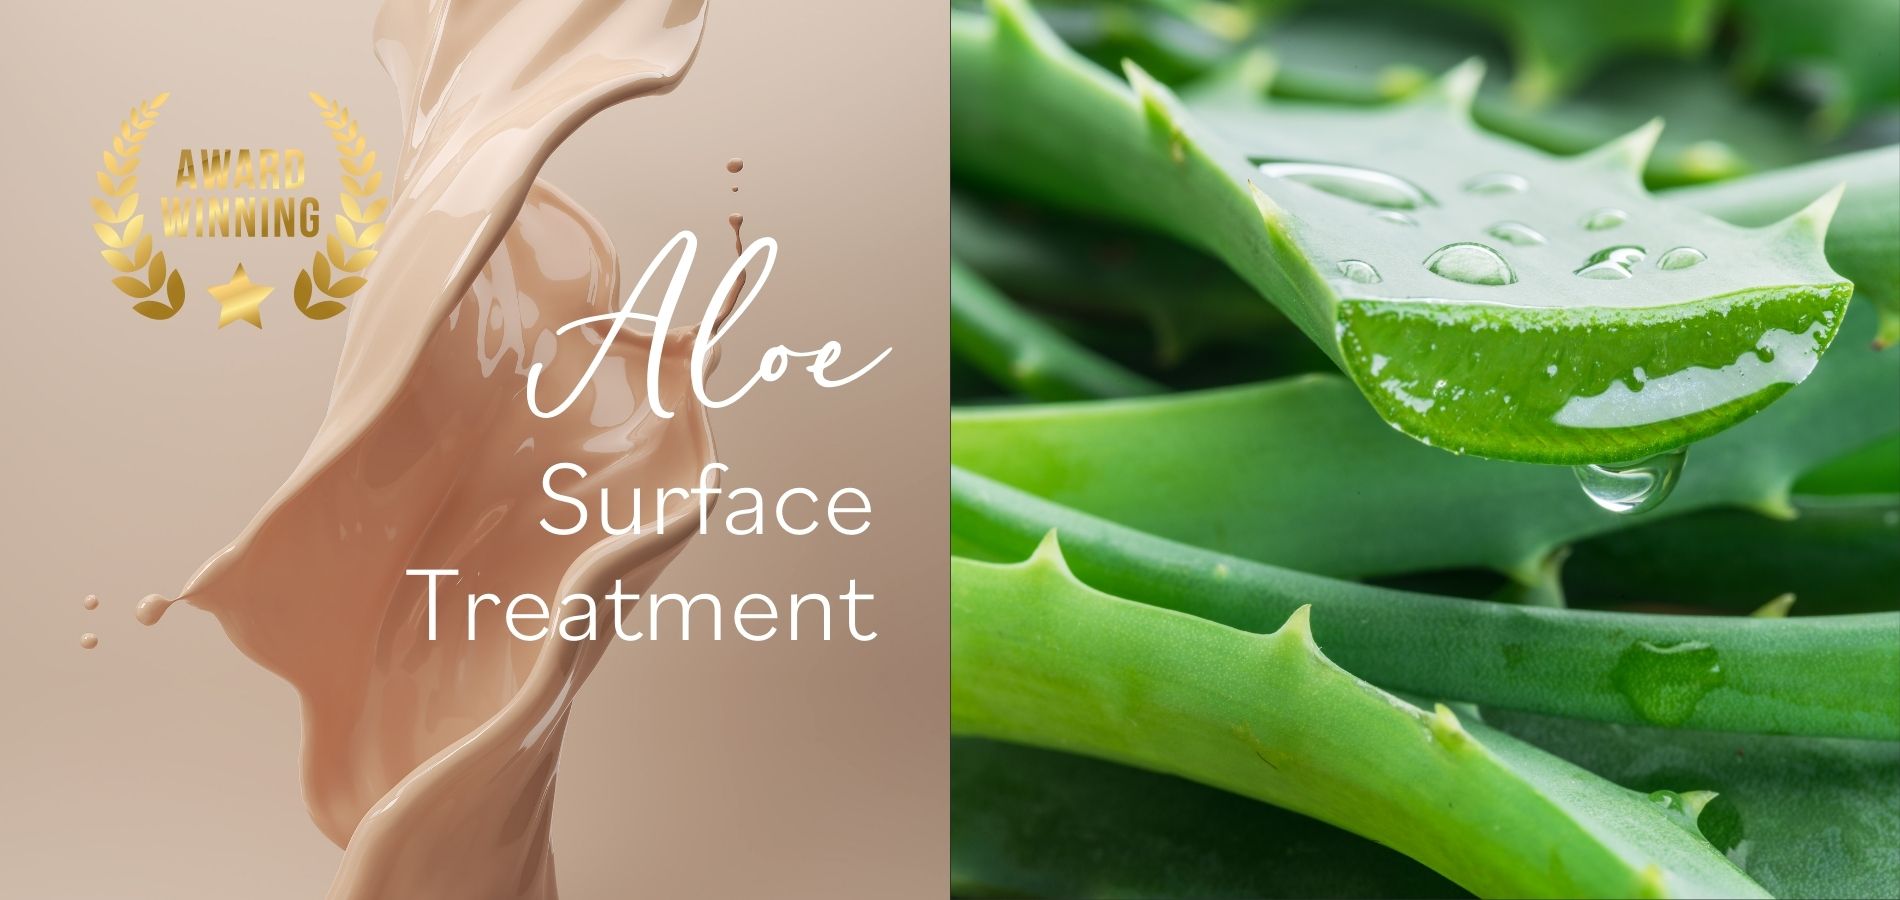 Aloe Surface Treatment Featured Image (Updated)